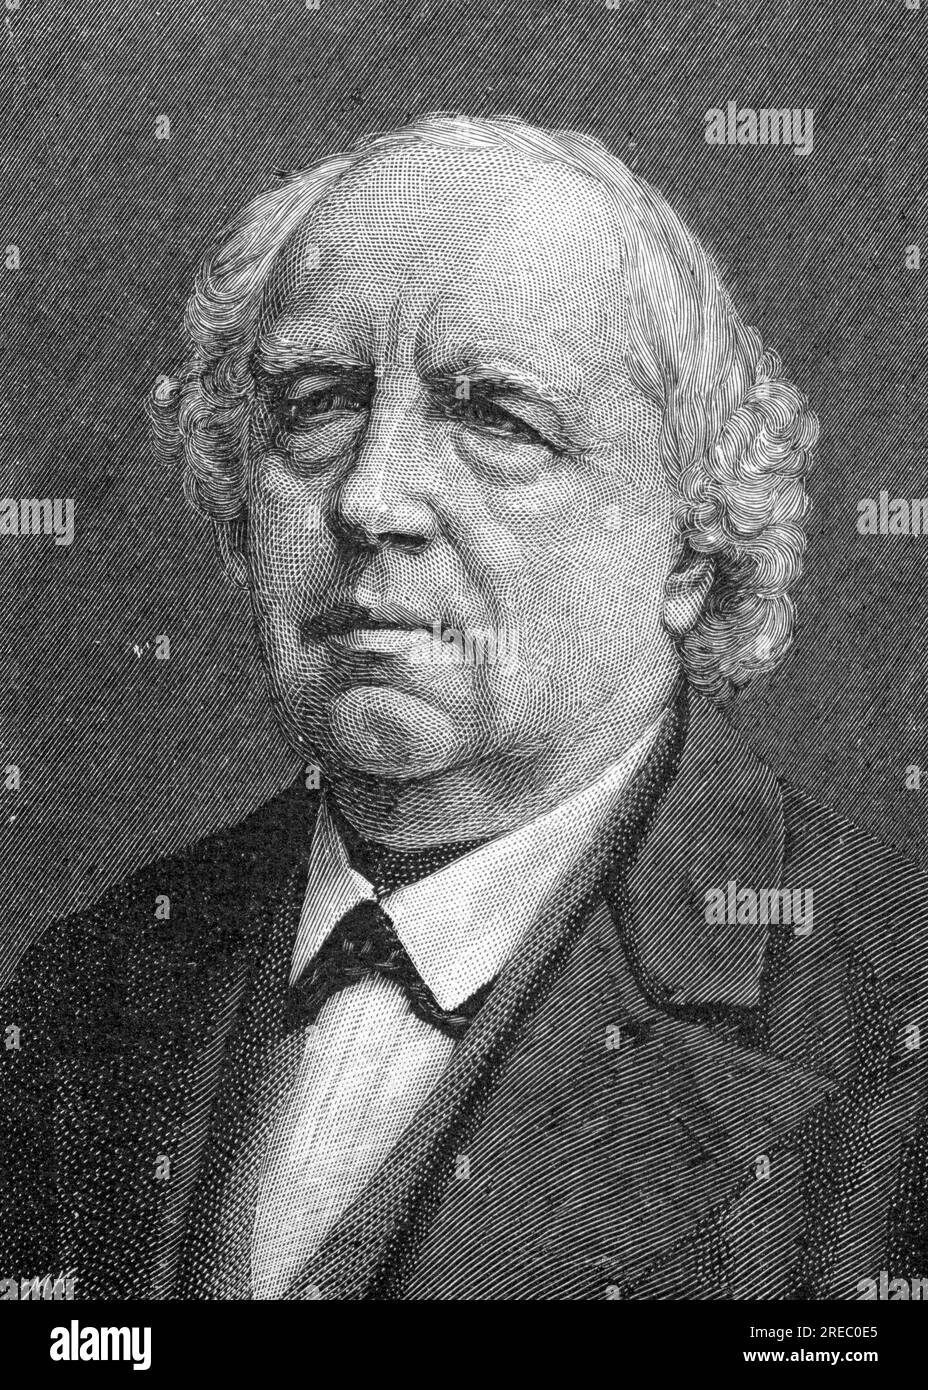 Weierstrass, Karl, 31.10.1815 - 19.2.1897, German mathematician, wood engraving, by Max Klinkicht, ARTIST'S COPYRIGHT HAS NOT TO BE CLEARED Stock Photo